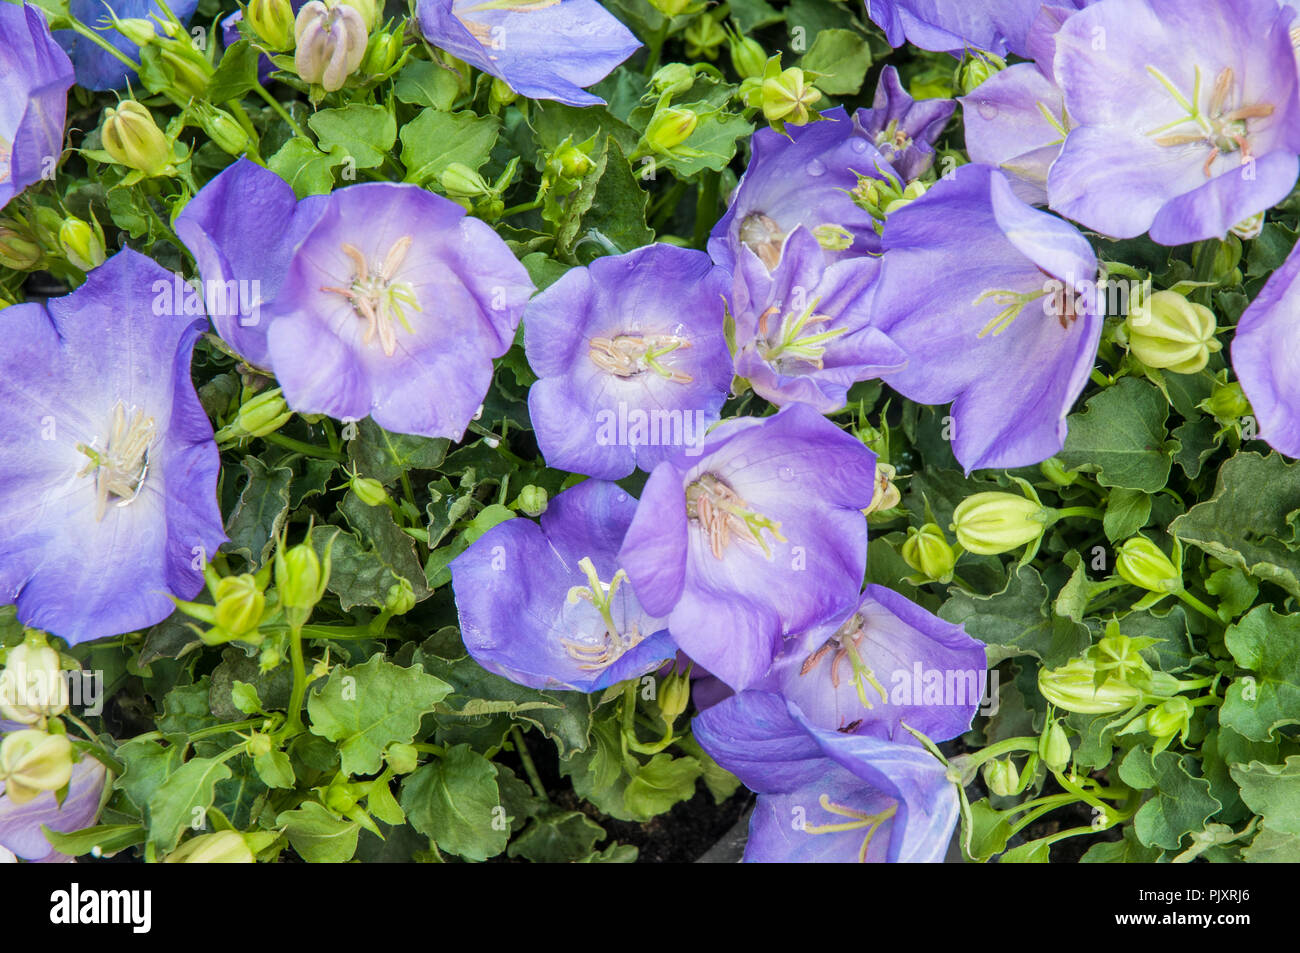 Campanula Carpatica Blue Clips. Clump forming perennial that is a soft  lavender blue. Ideal for borders and containers Stock Photo - Alamy